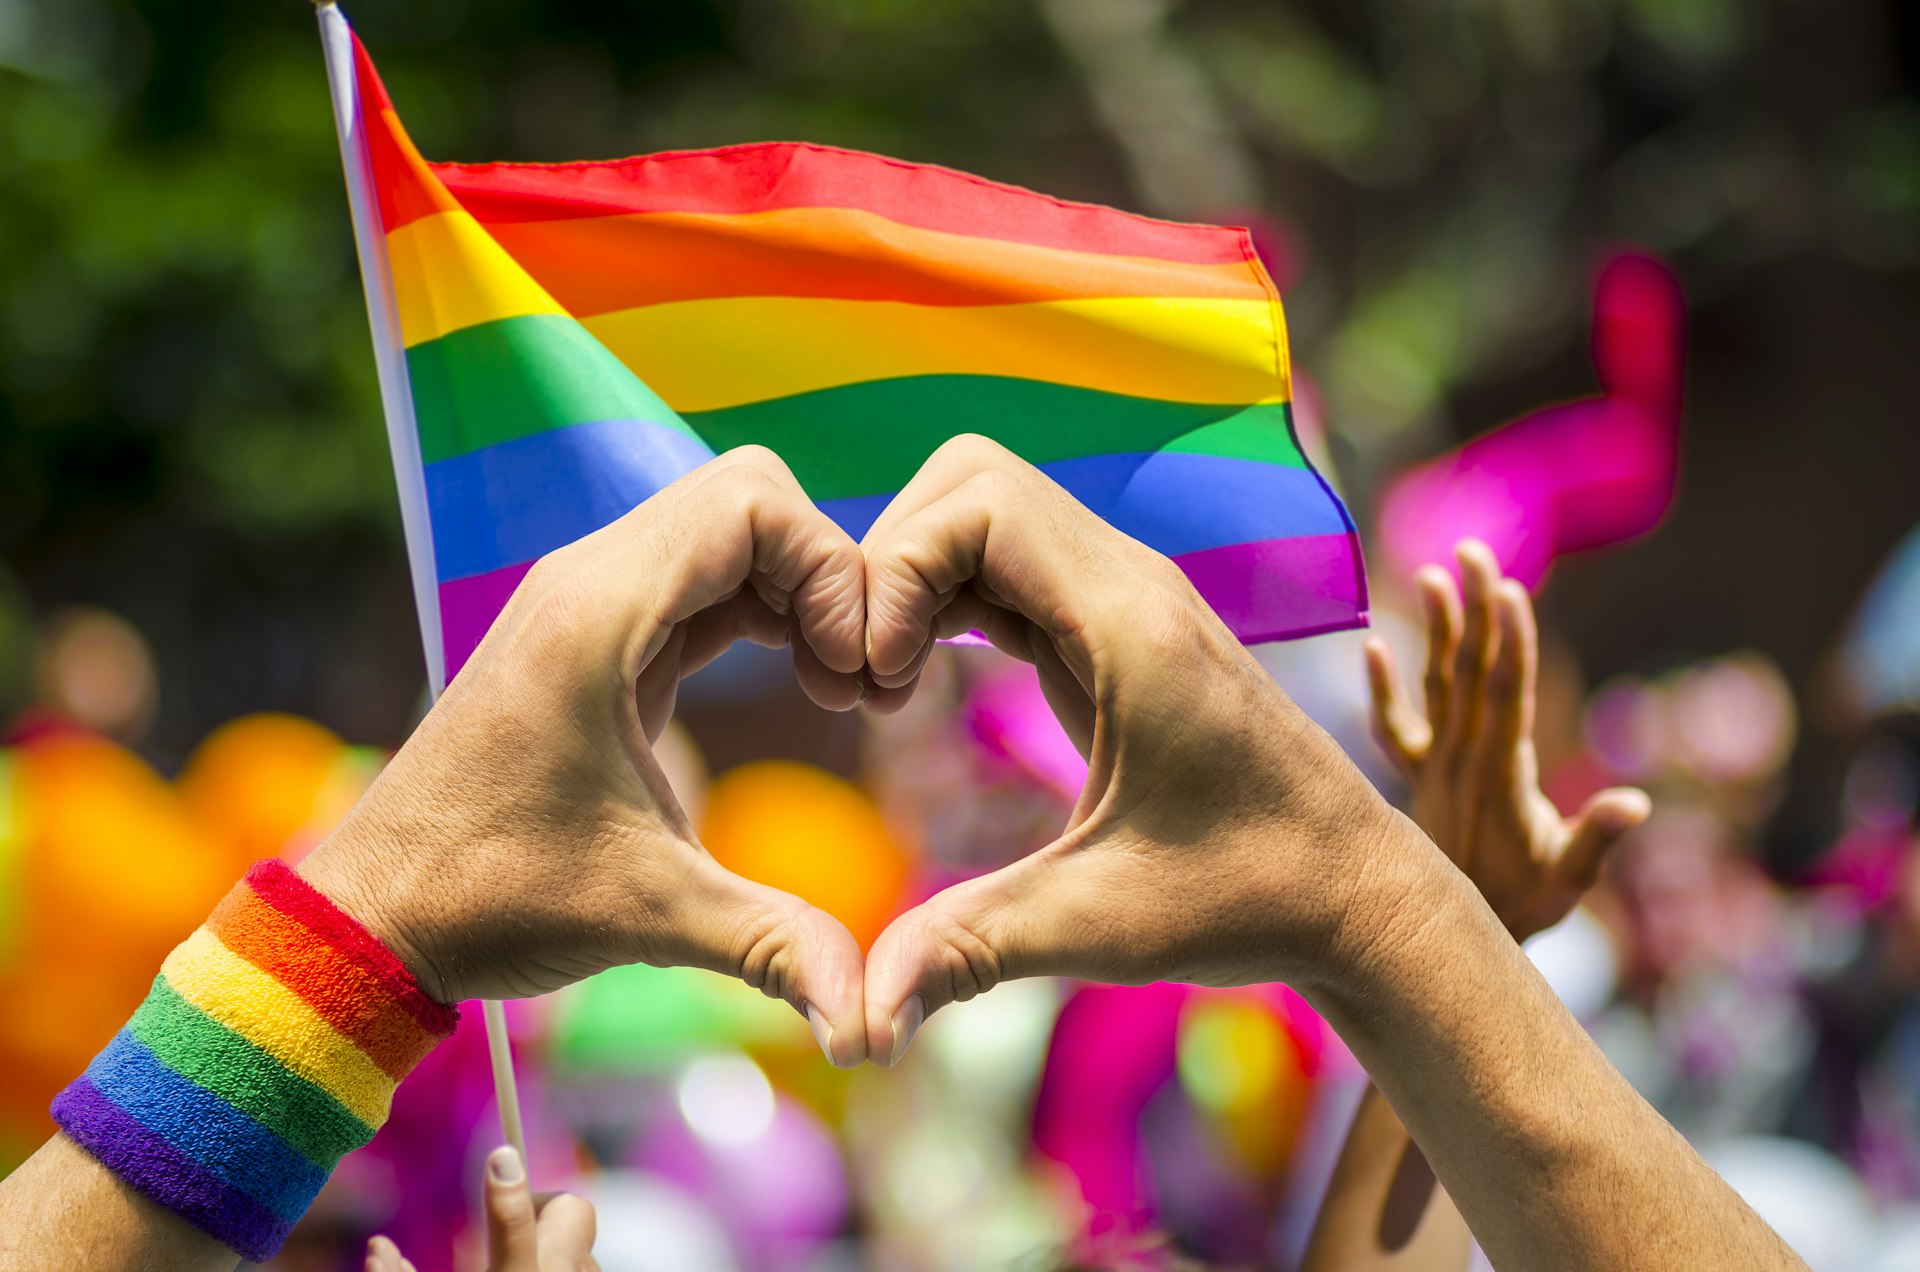 Two hands make a heart sign in front of a rainbow flag at the Pride parade in New York.